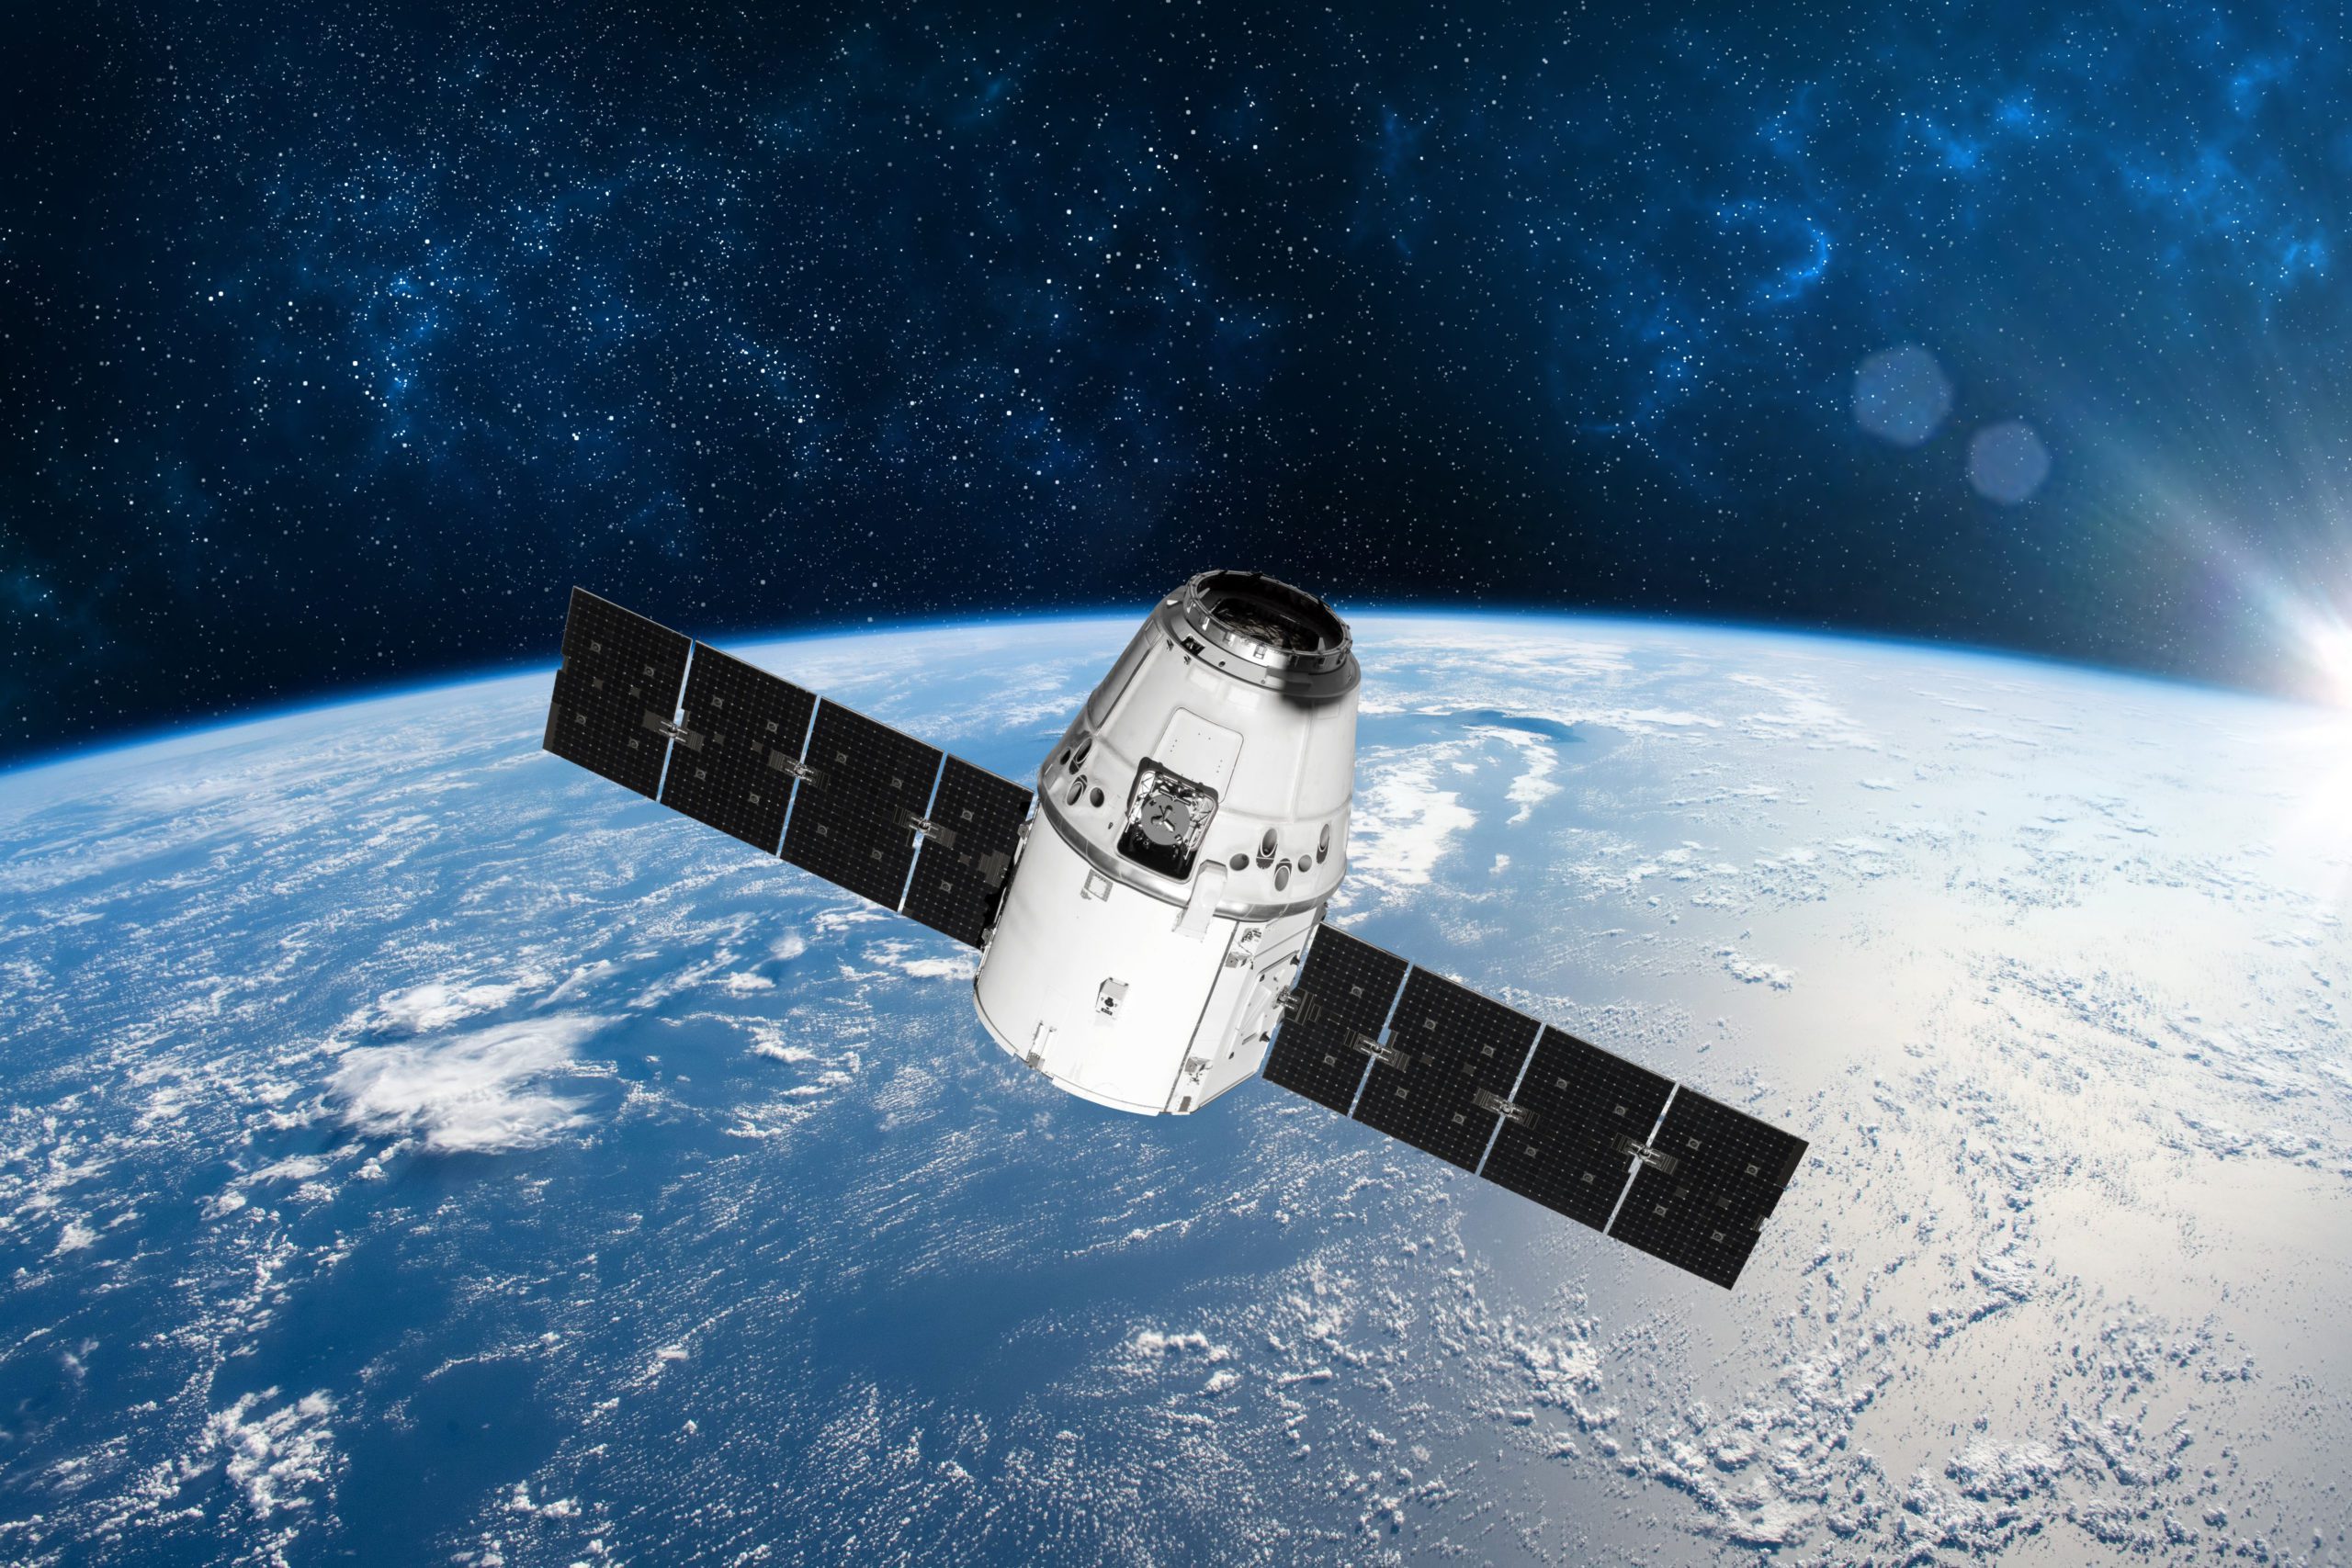 United Space Alliance included Aurora in the design of Temporis, a scheduling system targeted for use by NASA crew members on board next generation spacecraft during deep space missions.